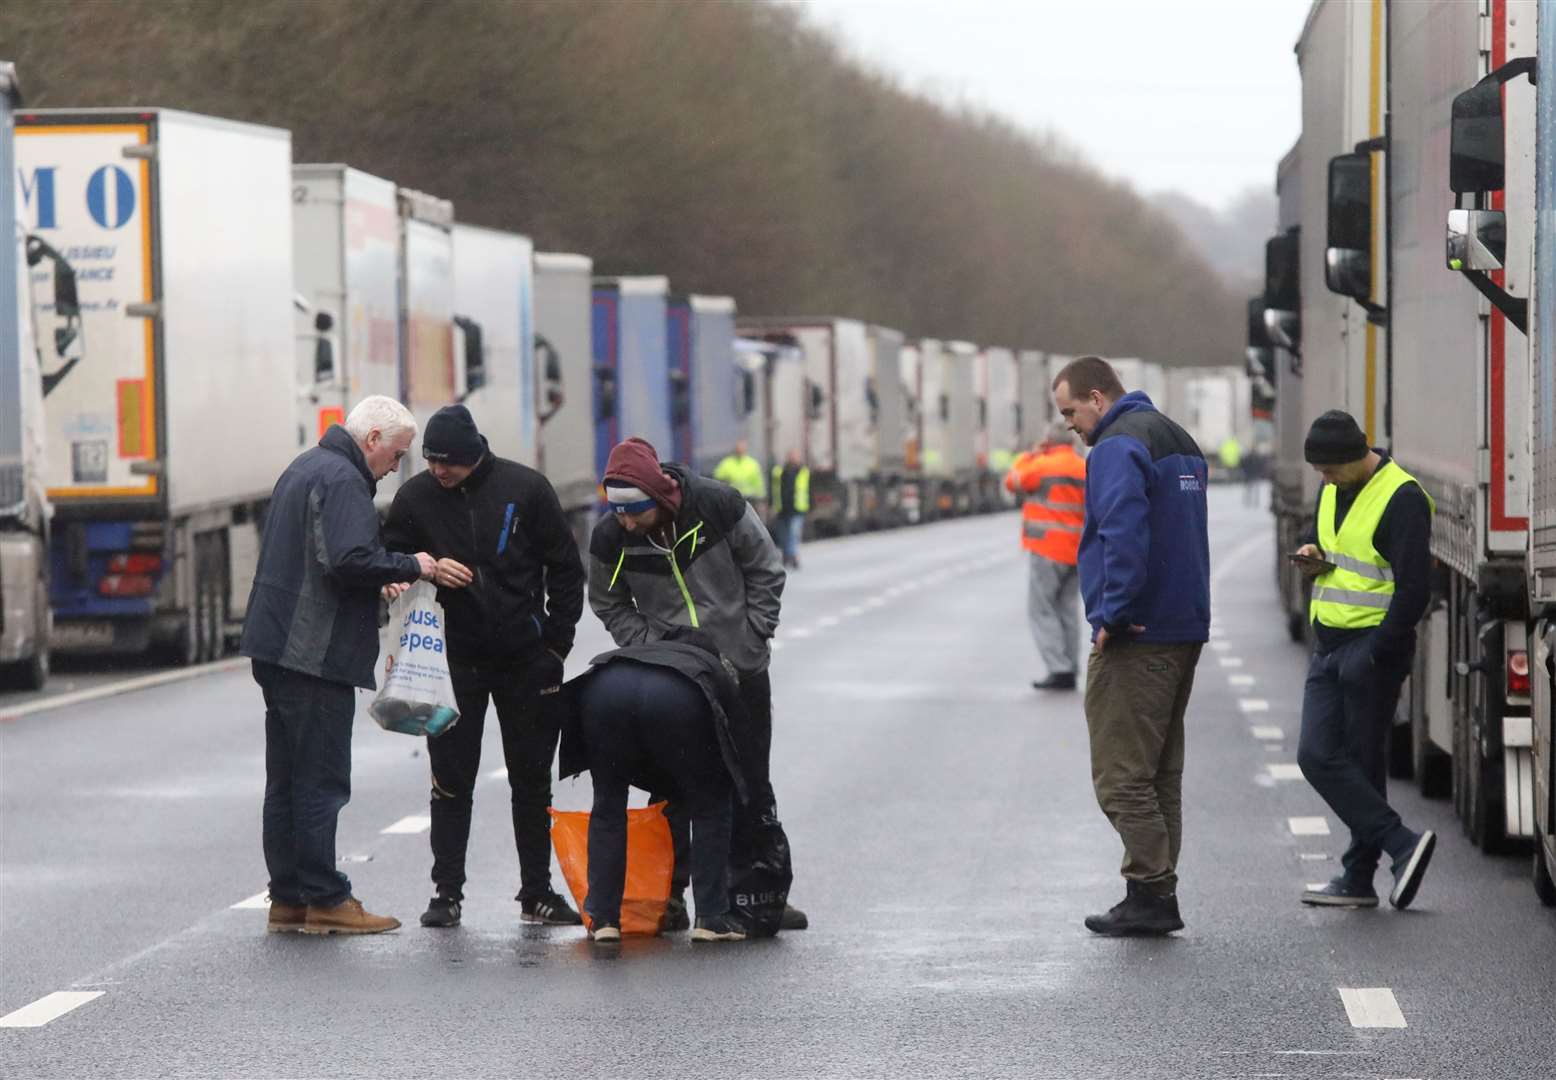 People from across Kent rallied round to help stranded lorry drivers over Chrismas. David and Jan James gave out food to truckers stuck on the M20 near Ashford. A huge testing operation was put into place to clear the backlog.